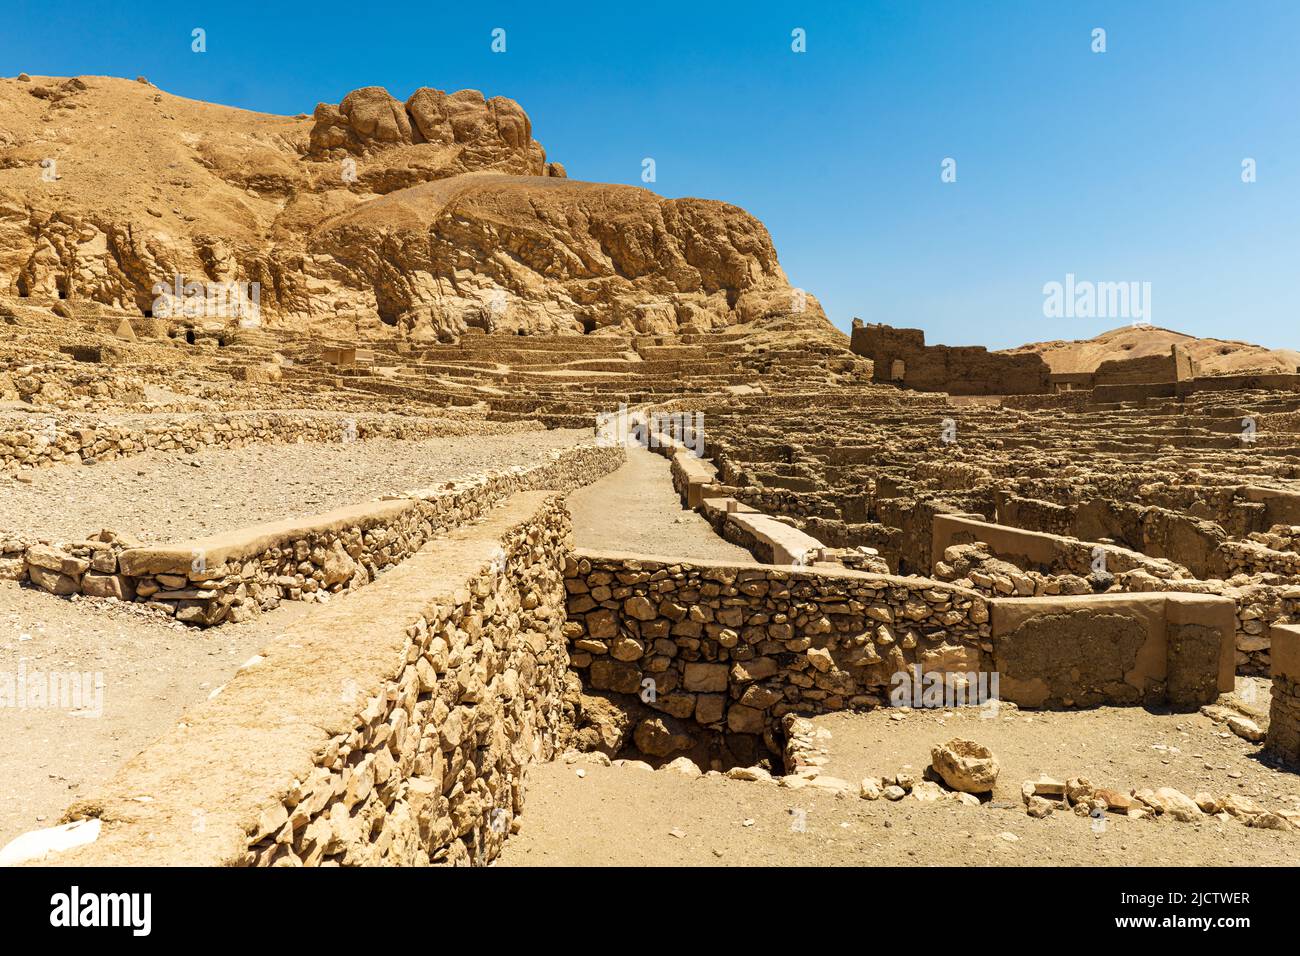 The Valley of the Artists. Giza, Egypt Stock Photo